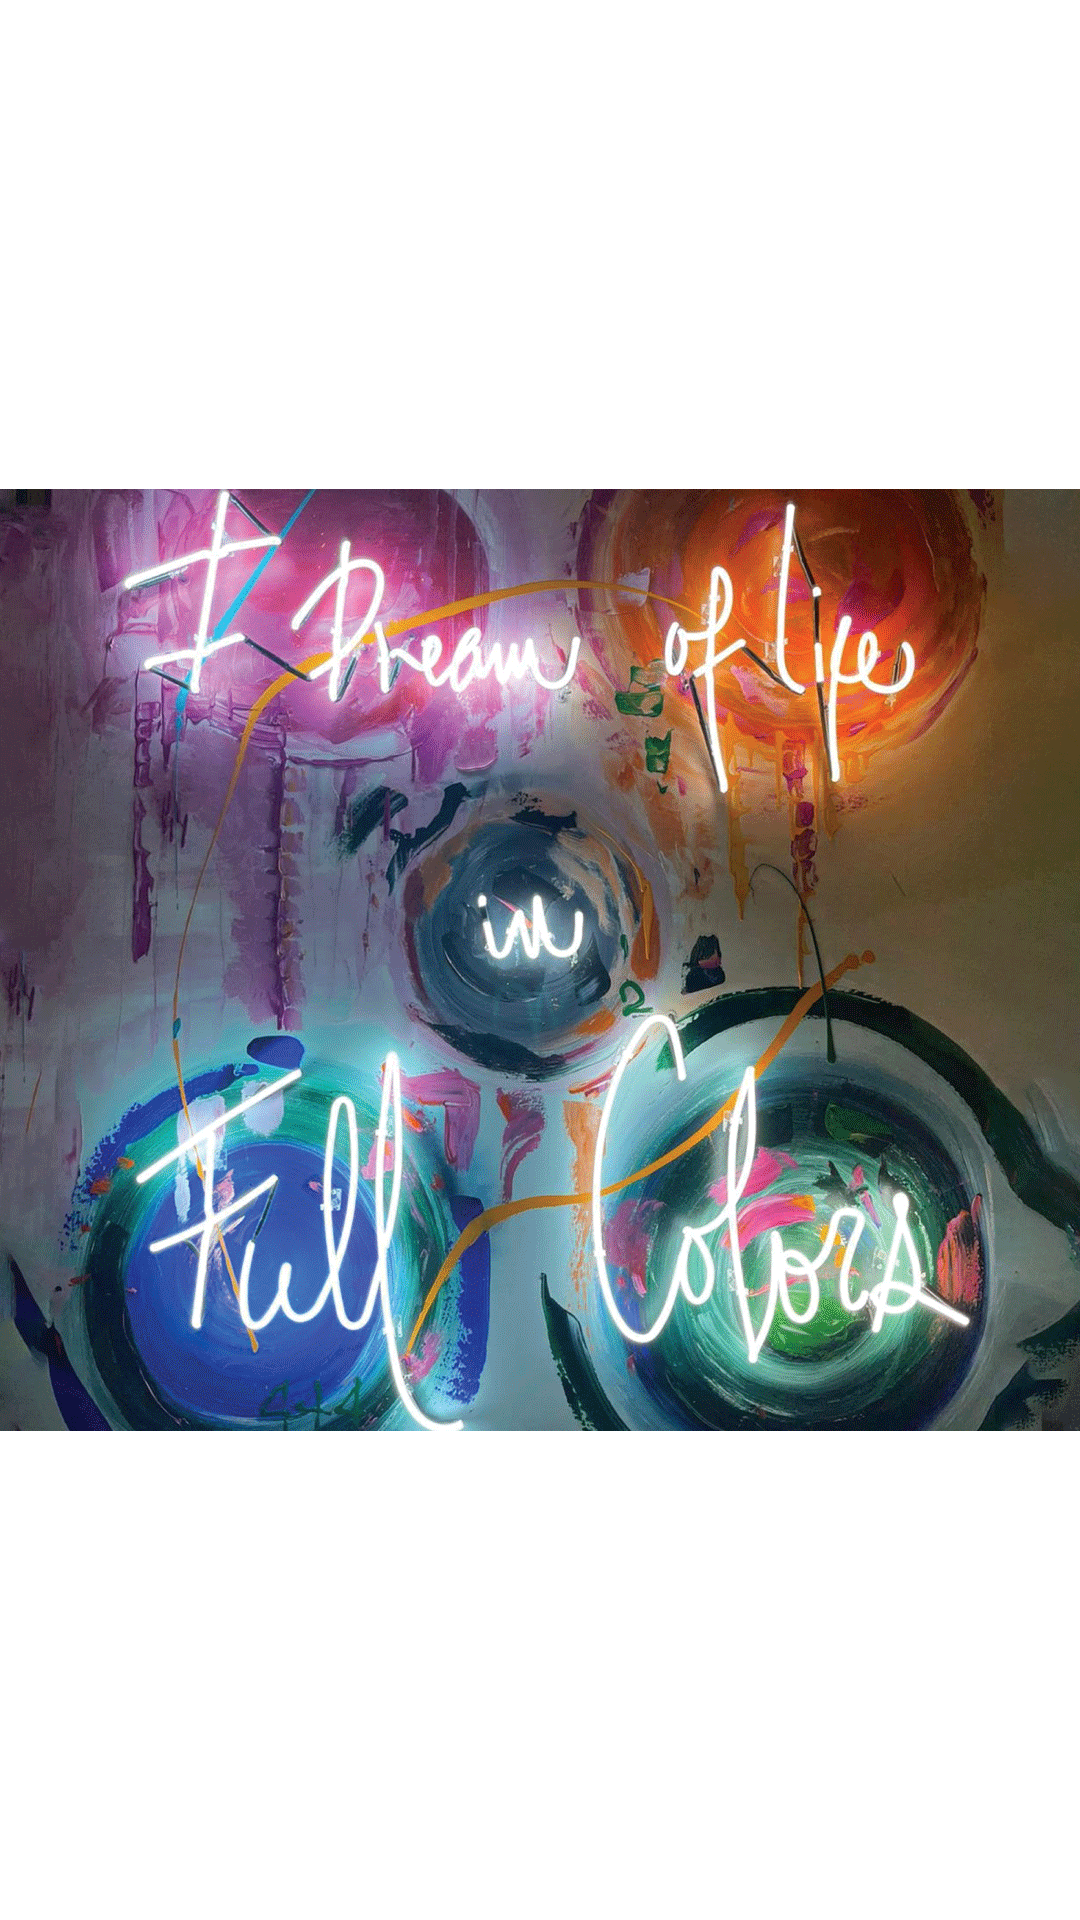 NEON "I DREAM OF LIFE IN FULL COLORS"